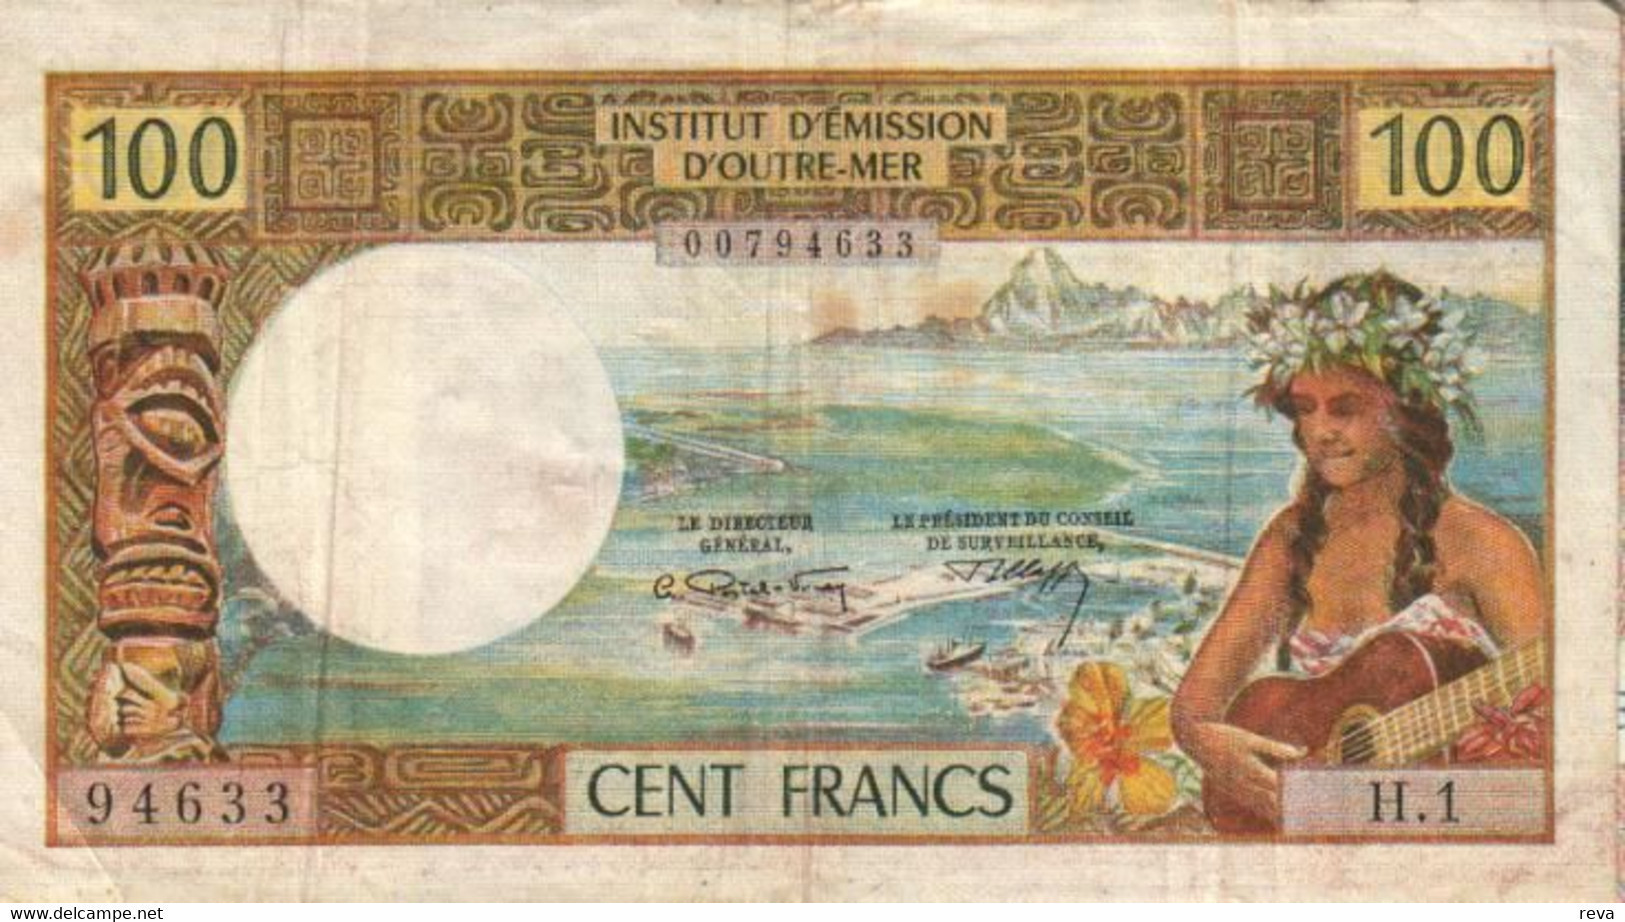 NEW CALEDONIA 100 FRANCS BROWN WOMAN HEAD FRONT &  BACK NOT DATED(1971) P61a SIG VARIETY F+ READ DESCRIPTION!! - Nouvelle-Calédonie 1873-1985